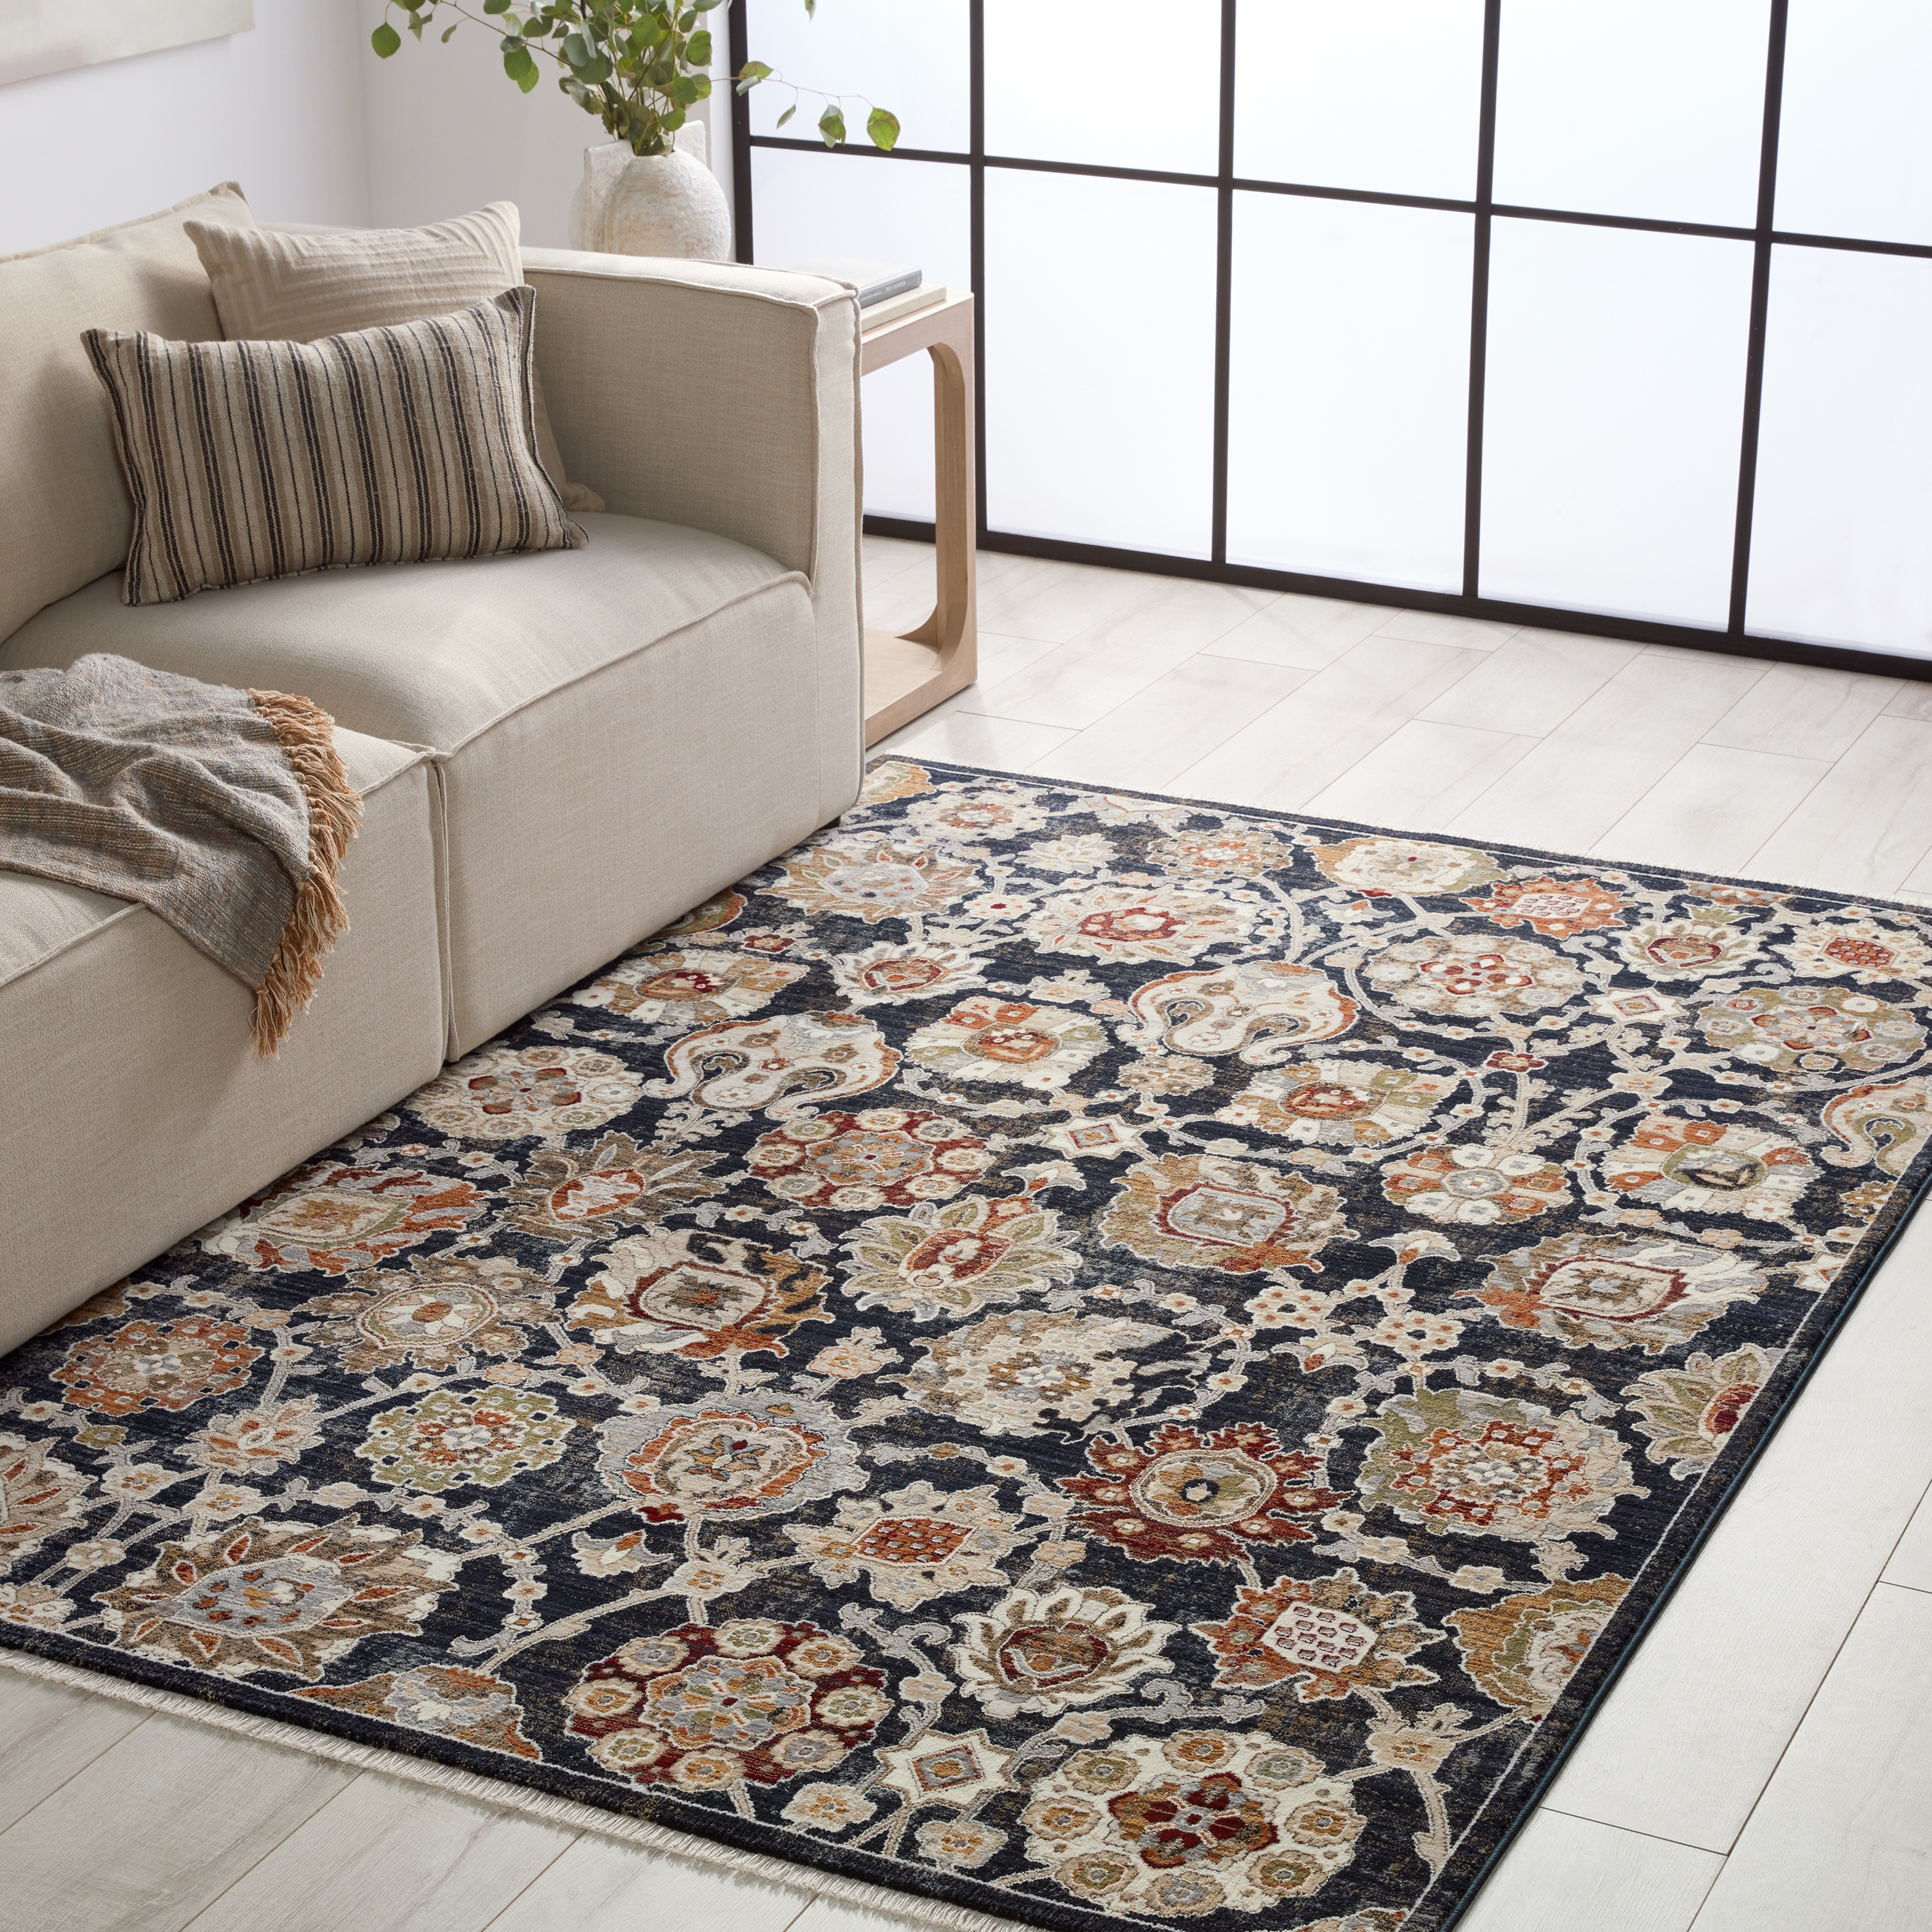 Vibe by Althea Floral Blue/ Cream Area Rug (5'X8') - Image 4